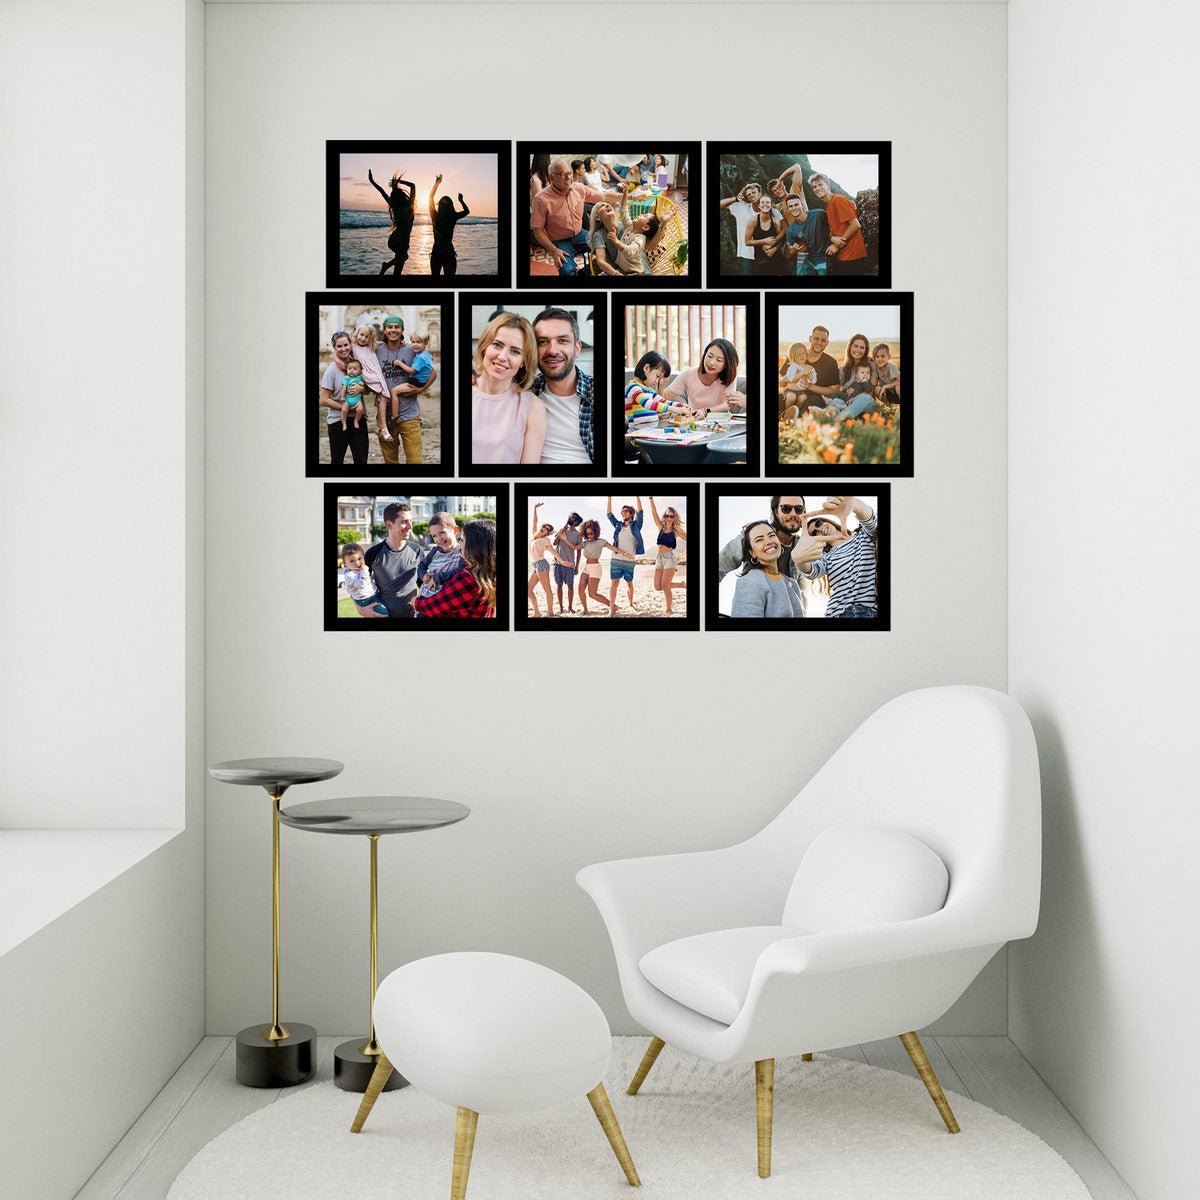 Memory Wall Collage Photo Frame - Set of 10 Photo Frames for 10 Photos of 8"x10" 2